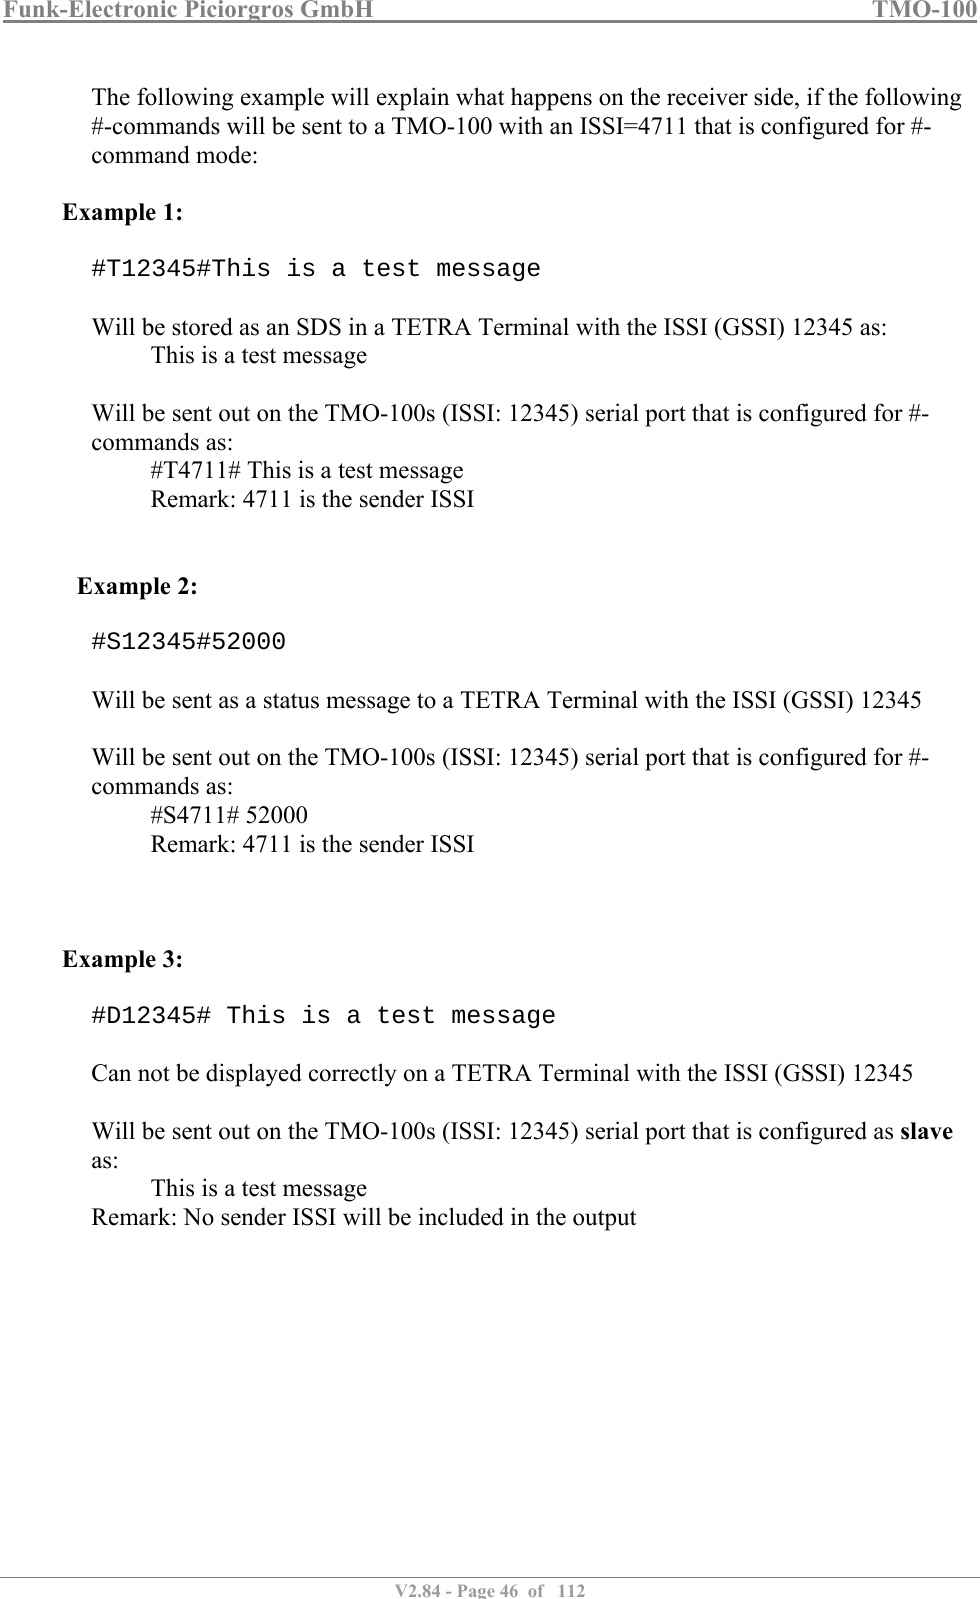 Funk-Electronic Piciorgros GmbH   TMO-100   V2.84 - Page 46  of   112   The following example will explain what happens on the receiver side, if the following #-commands will be sent to a TMO-100 with an ISSI=4711 that is configured for #-command mode:  Example 1:  #T12345#This is a test message  Will be stored as an SDS in a TETRA Terminal with the ISSI (GSSI) 12345 as:   This is a test message  Will be sent out on the TMO-100s (ISSI: 12345) serial port that is configured for #-commands as: #T4711# This is a test message   Remark: 4711 is the sender ISSI    Example 2:  #S12345#52000  Will be sent as a status message to a TETRA Terminal with the ISSI (GSSI) 12345  Will be sent out on the TMO-100s (ISSI: 12345) serial port that is configured for #-commands as: #S4711# 52000   Remark: 4711 is the sender ISSI    Example 3:  #D12345# This is a test message  Can not be displayed correctly on a TETRA Terminal with the ISSI (GSSI) 12345  Will be sent out on the TMO-100s (ISSI: 12345) serial port that is configured as slave as: This is a test message  Remark: No sender ISSI will be included in the output   